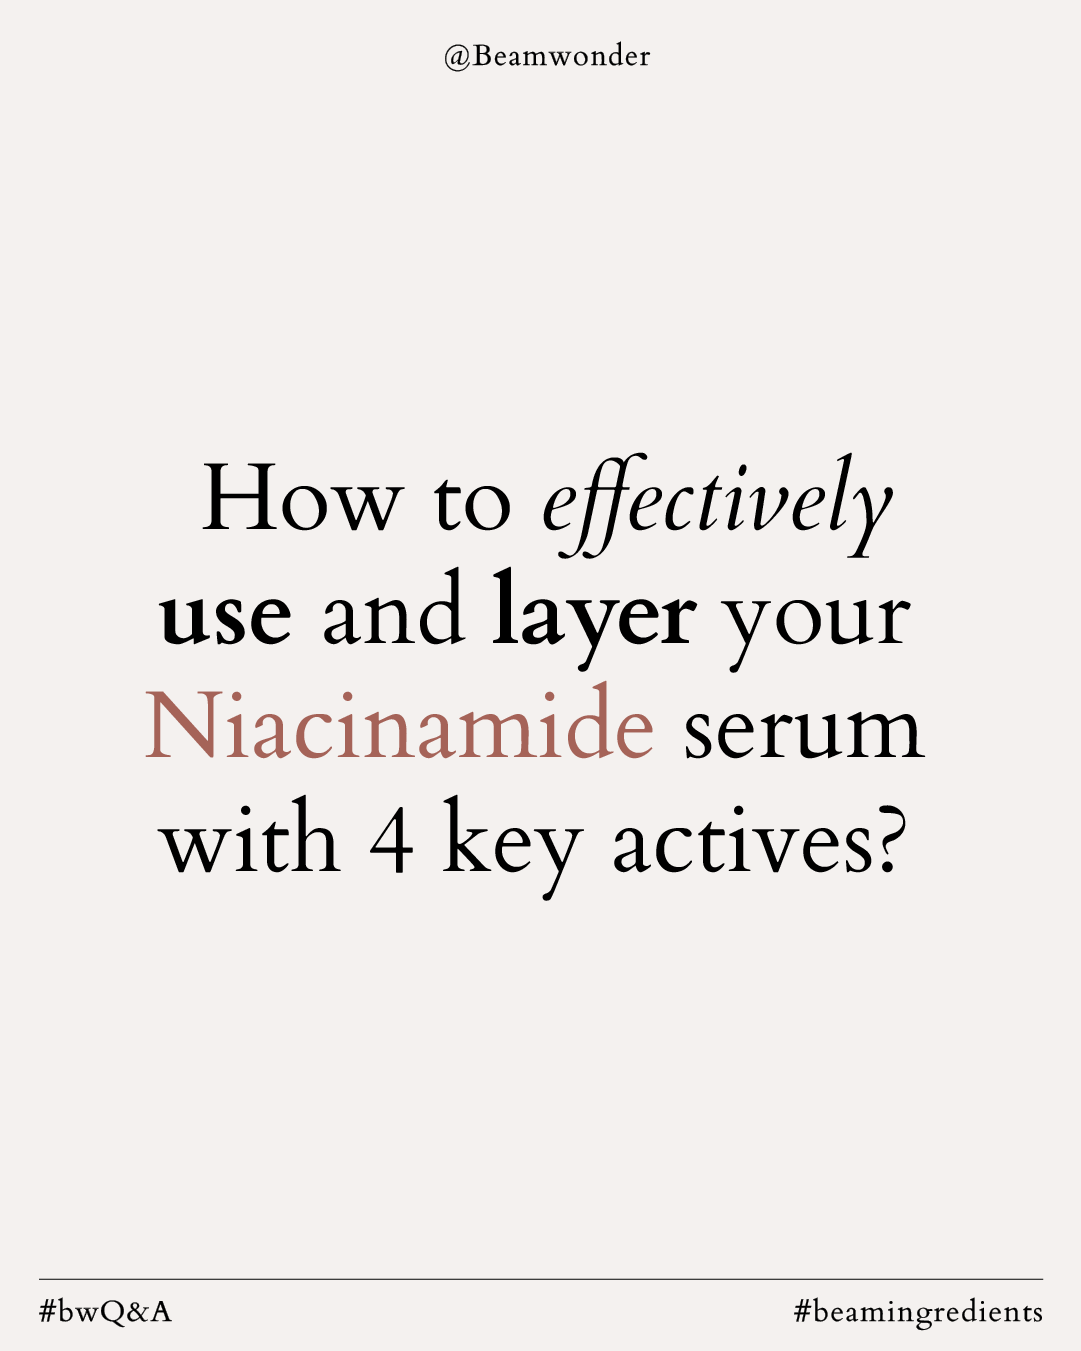 How to effectively use and layer your Niacinamide serum with 4 key actives?